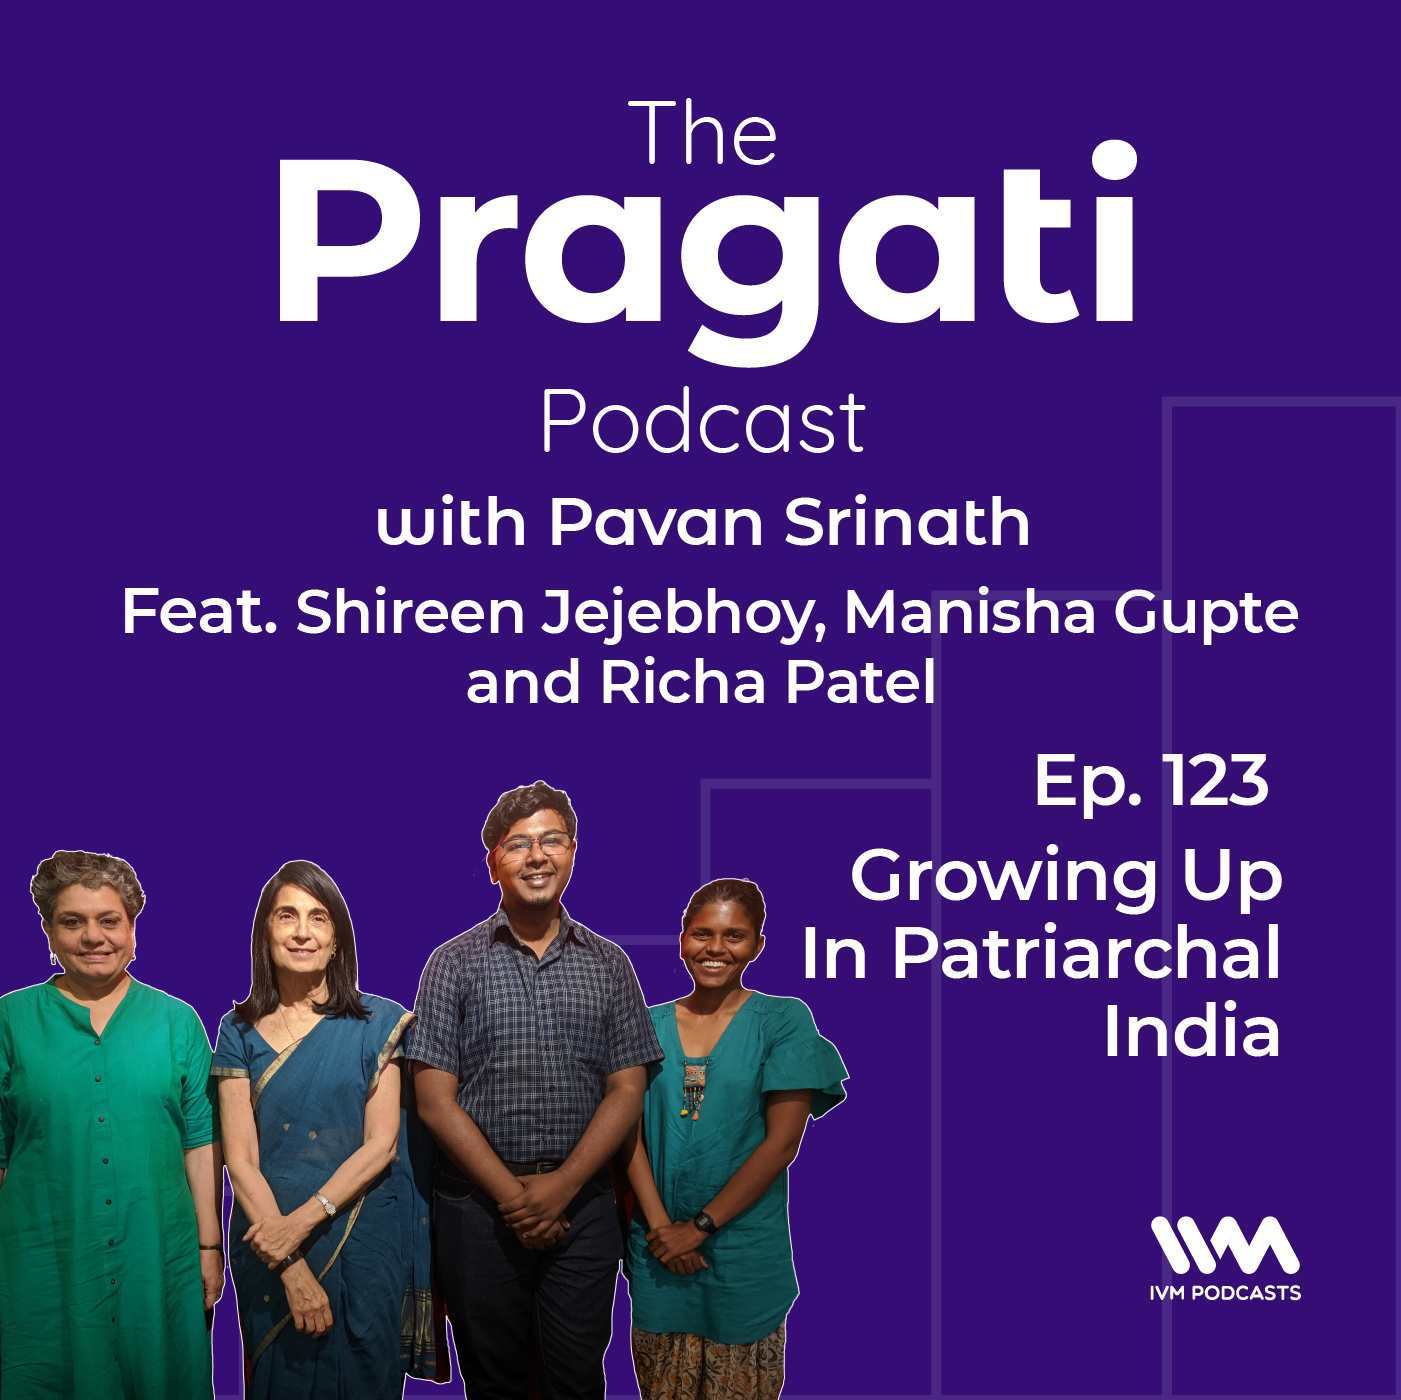 Ep. 123: Growing Up In Patriarchal India